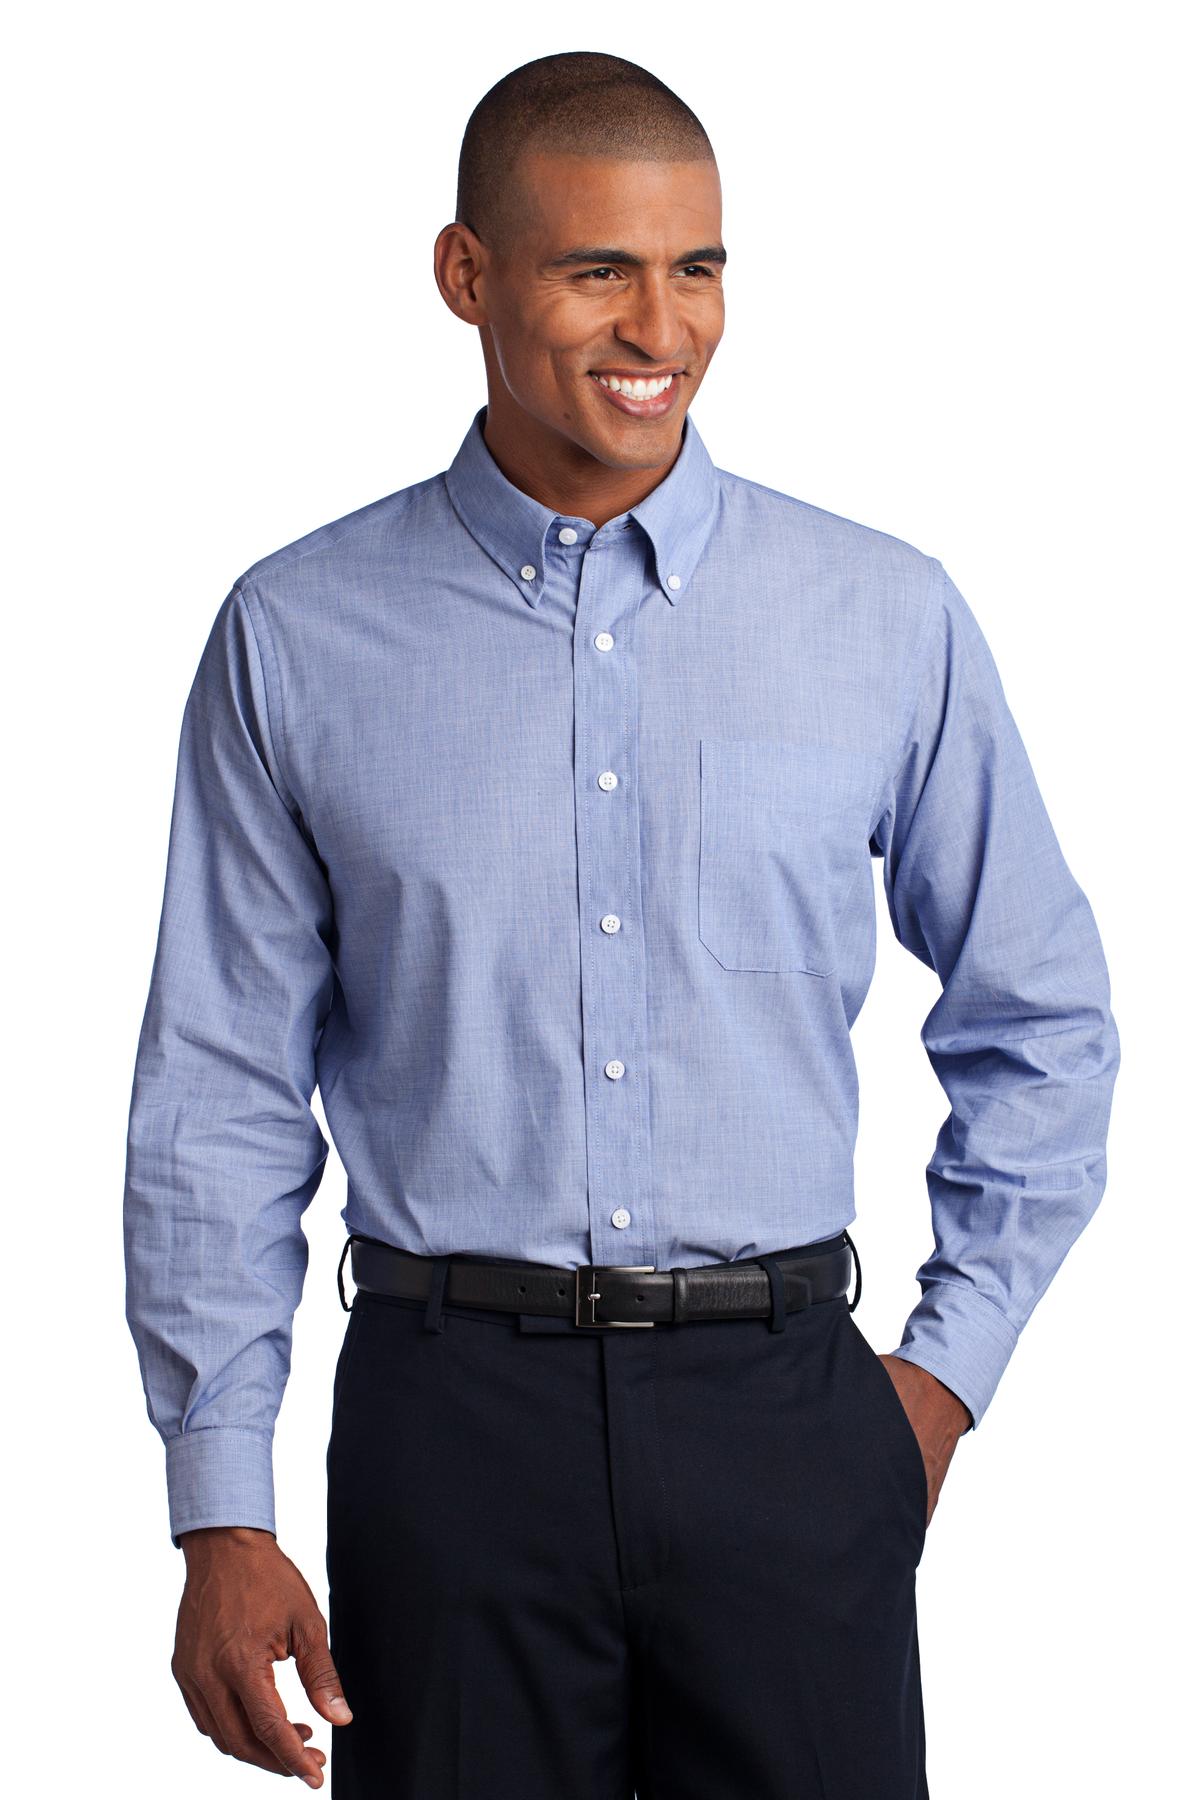 Port Authority Woven Shirts for Hospitality ® Crosshatch Easy Care Shirt.-Port Authority